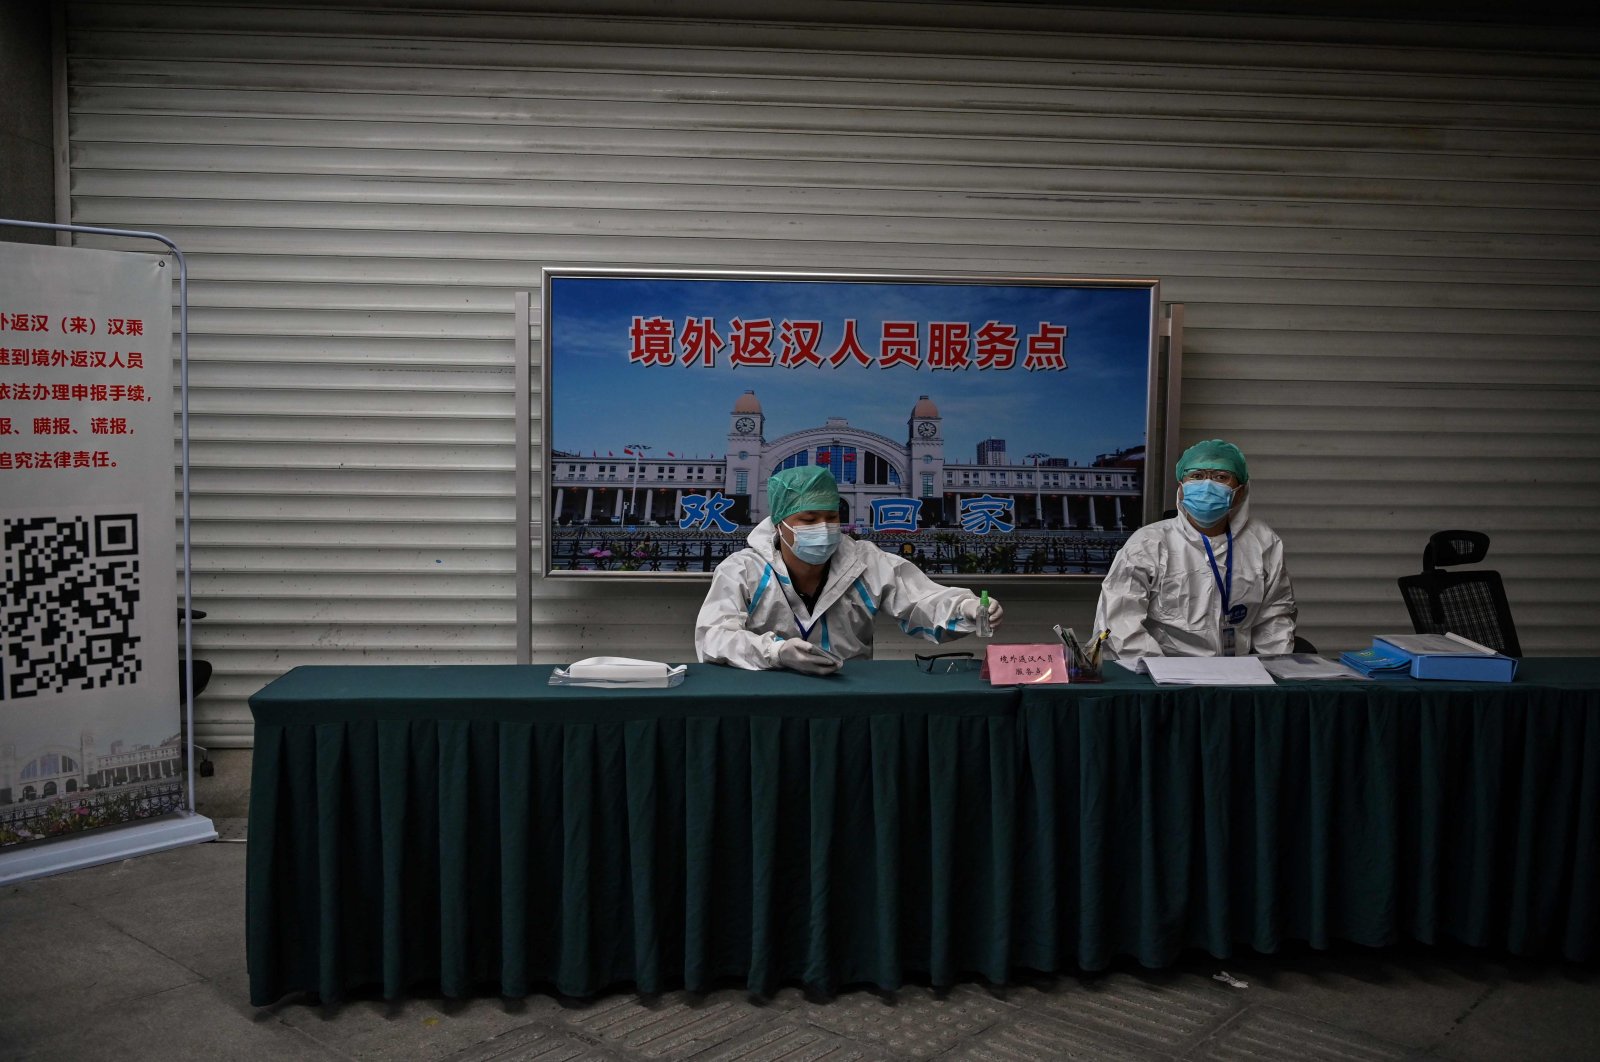 Employees wearing protective gear work at Hankou railway station, Wuhan, China, May 12, 2020. (AFP Photo)